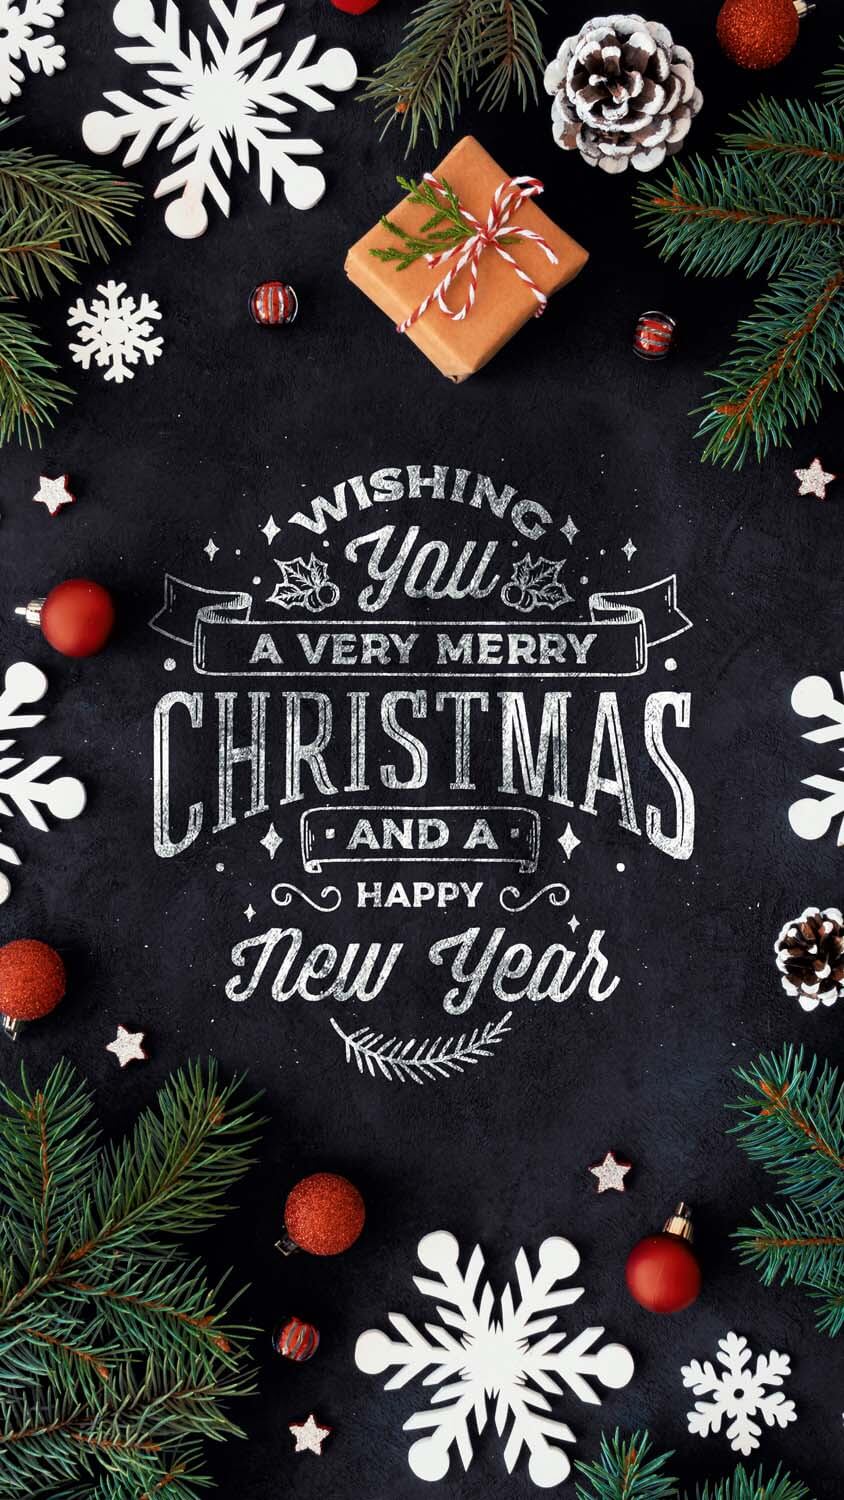 Wishing You A Very Merry Christmas IPhone Wallpaper HD - IPhone Wallpapers  : iPhone Wallpapers